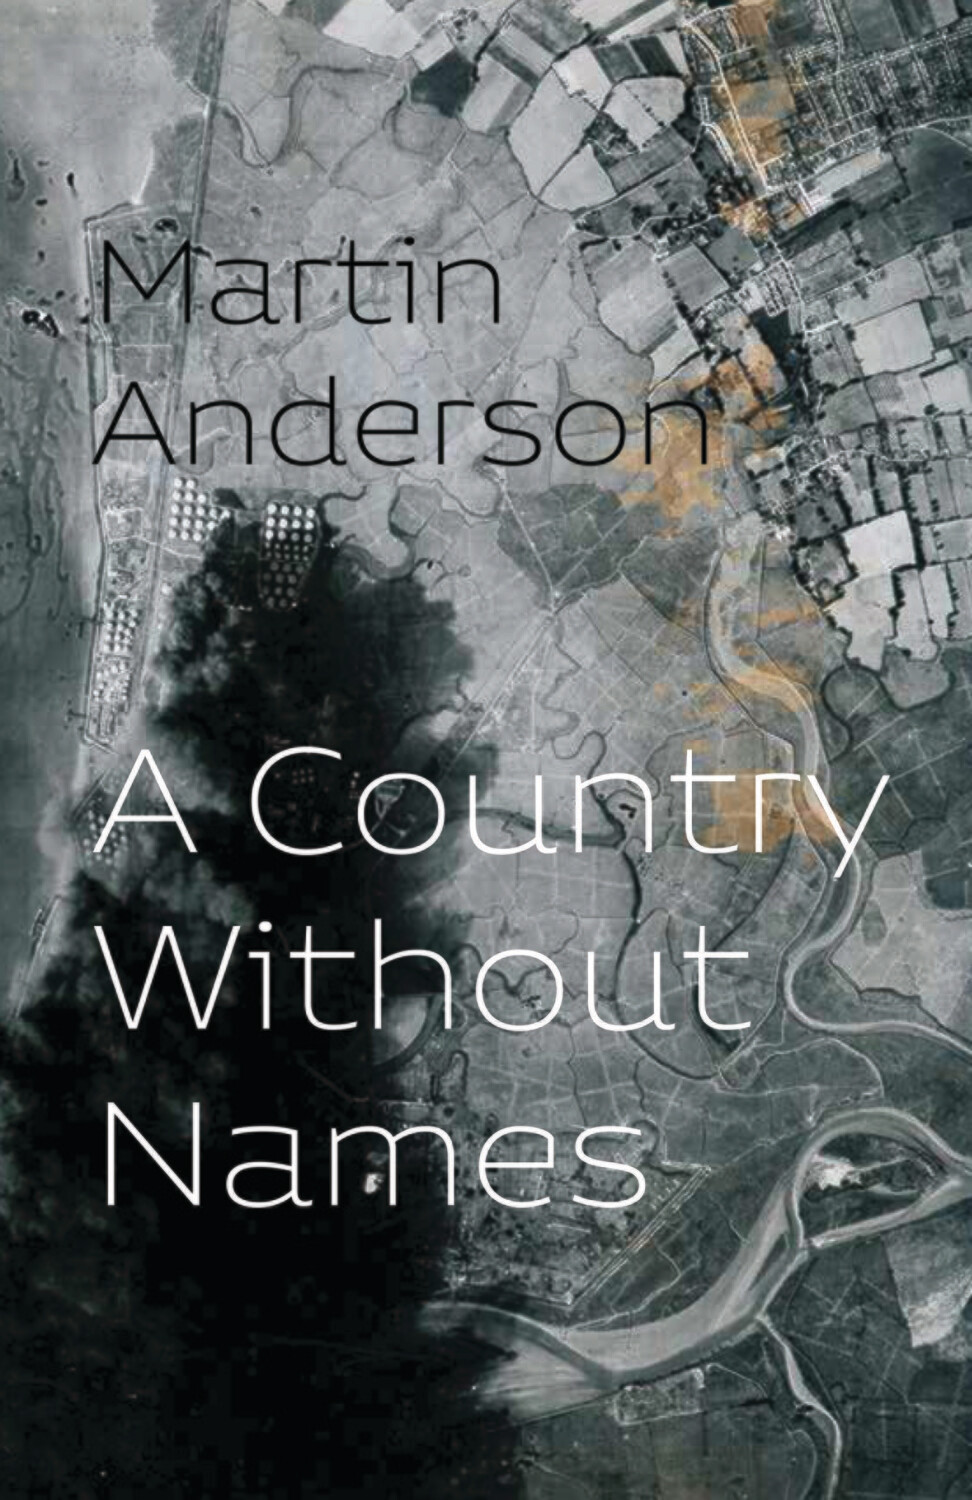 Martin Anderson - A Country Without Names